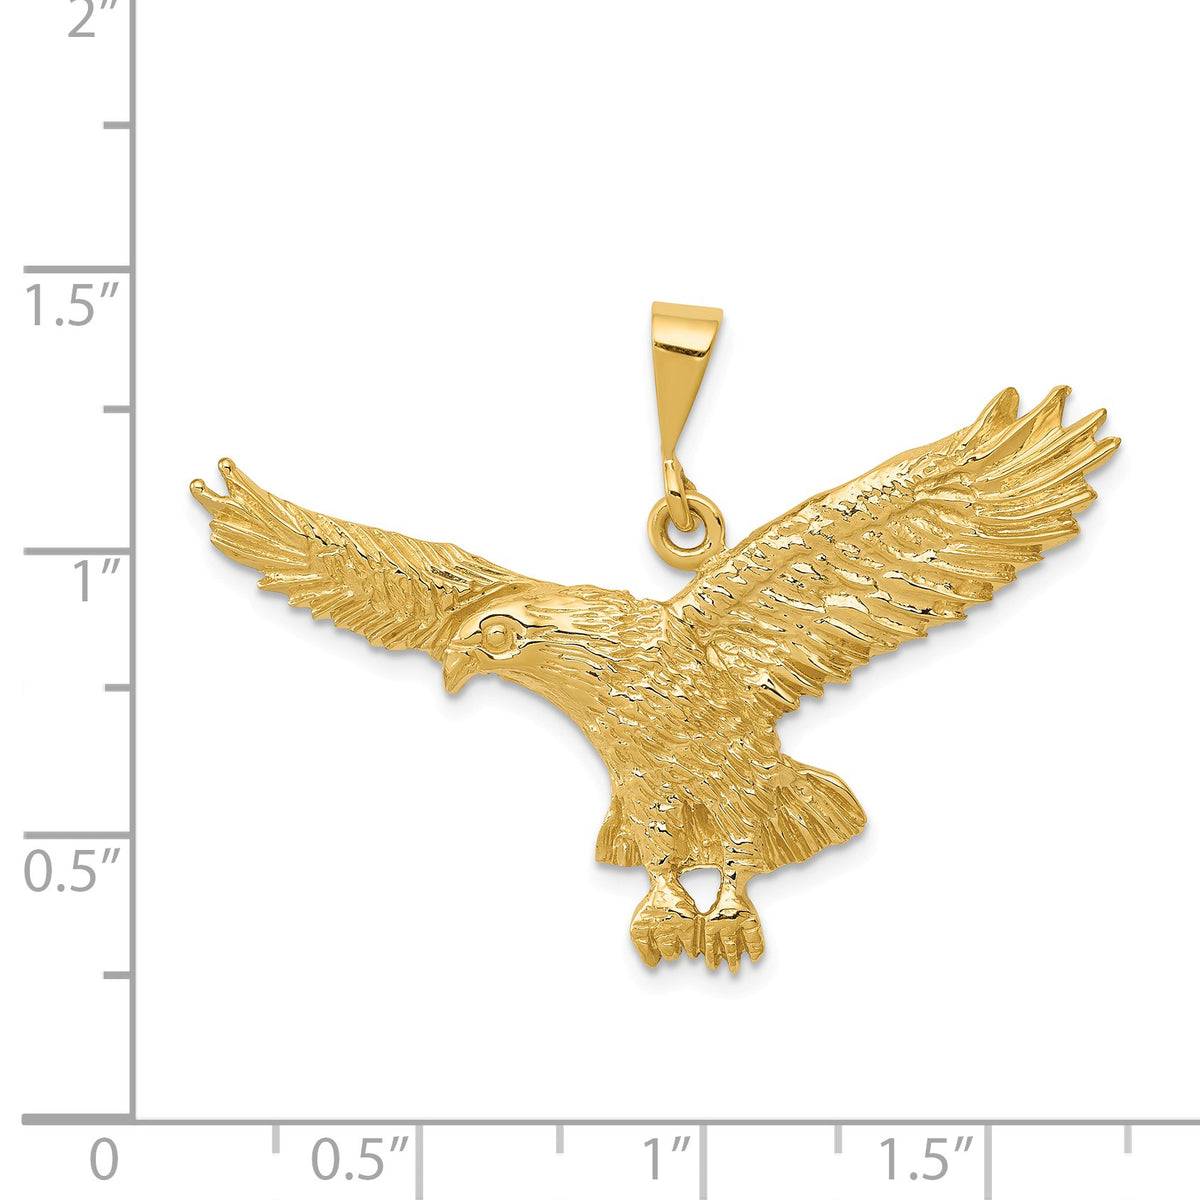 Alternate view of the 14k Yellow Gold Large 2D Eagle Pendant by The Black Bow Jewelry Co.